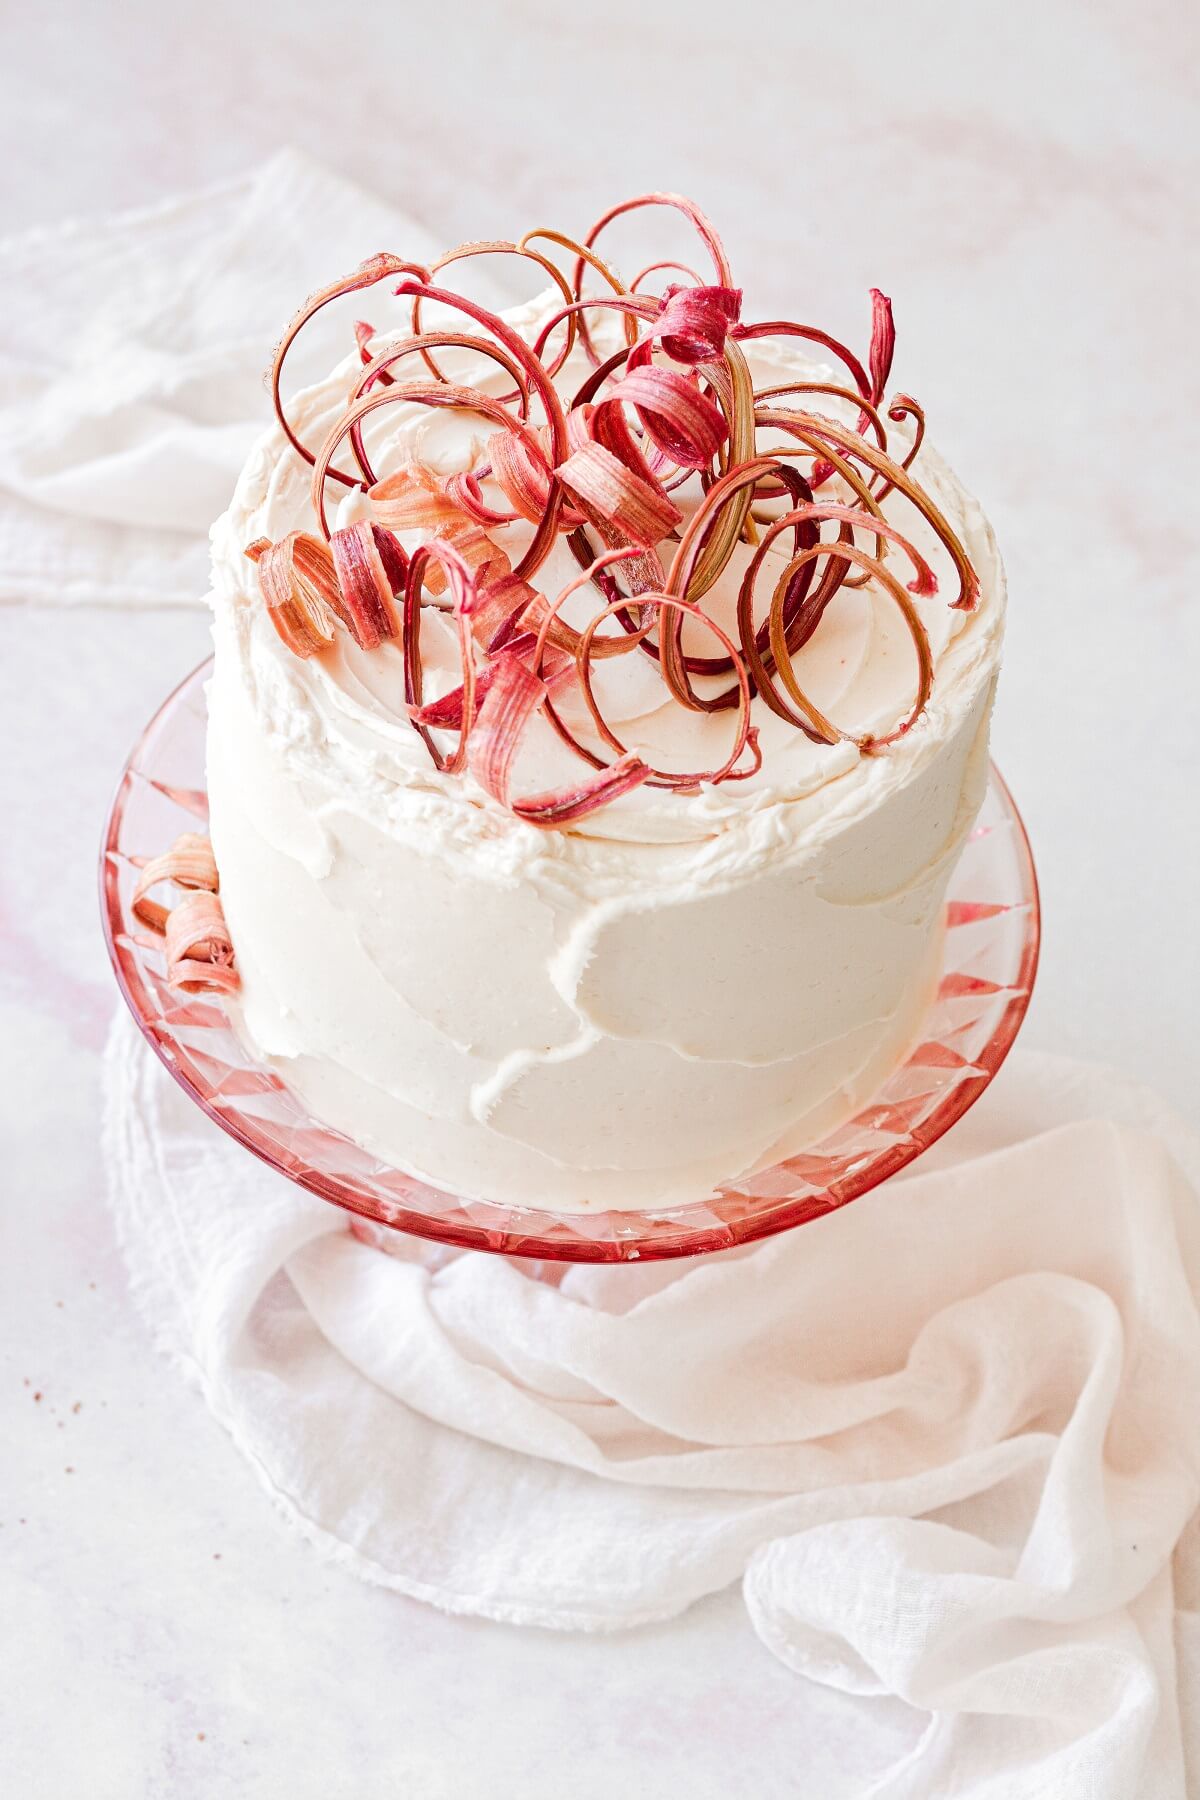 Vanilla rhubarb layer cake topped with candied rhubarb curls.